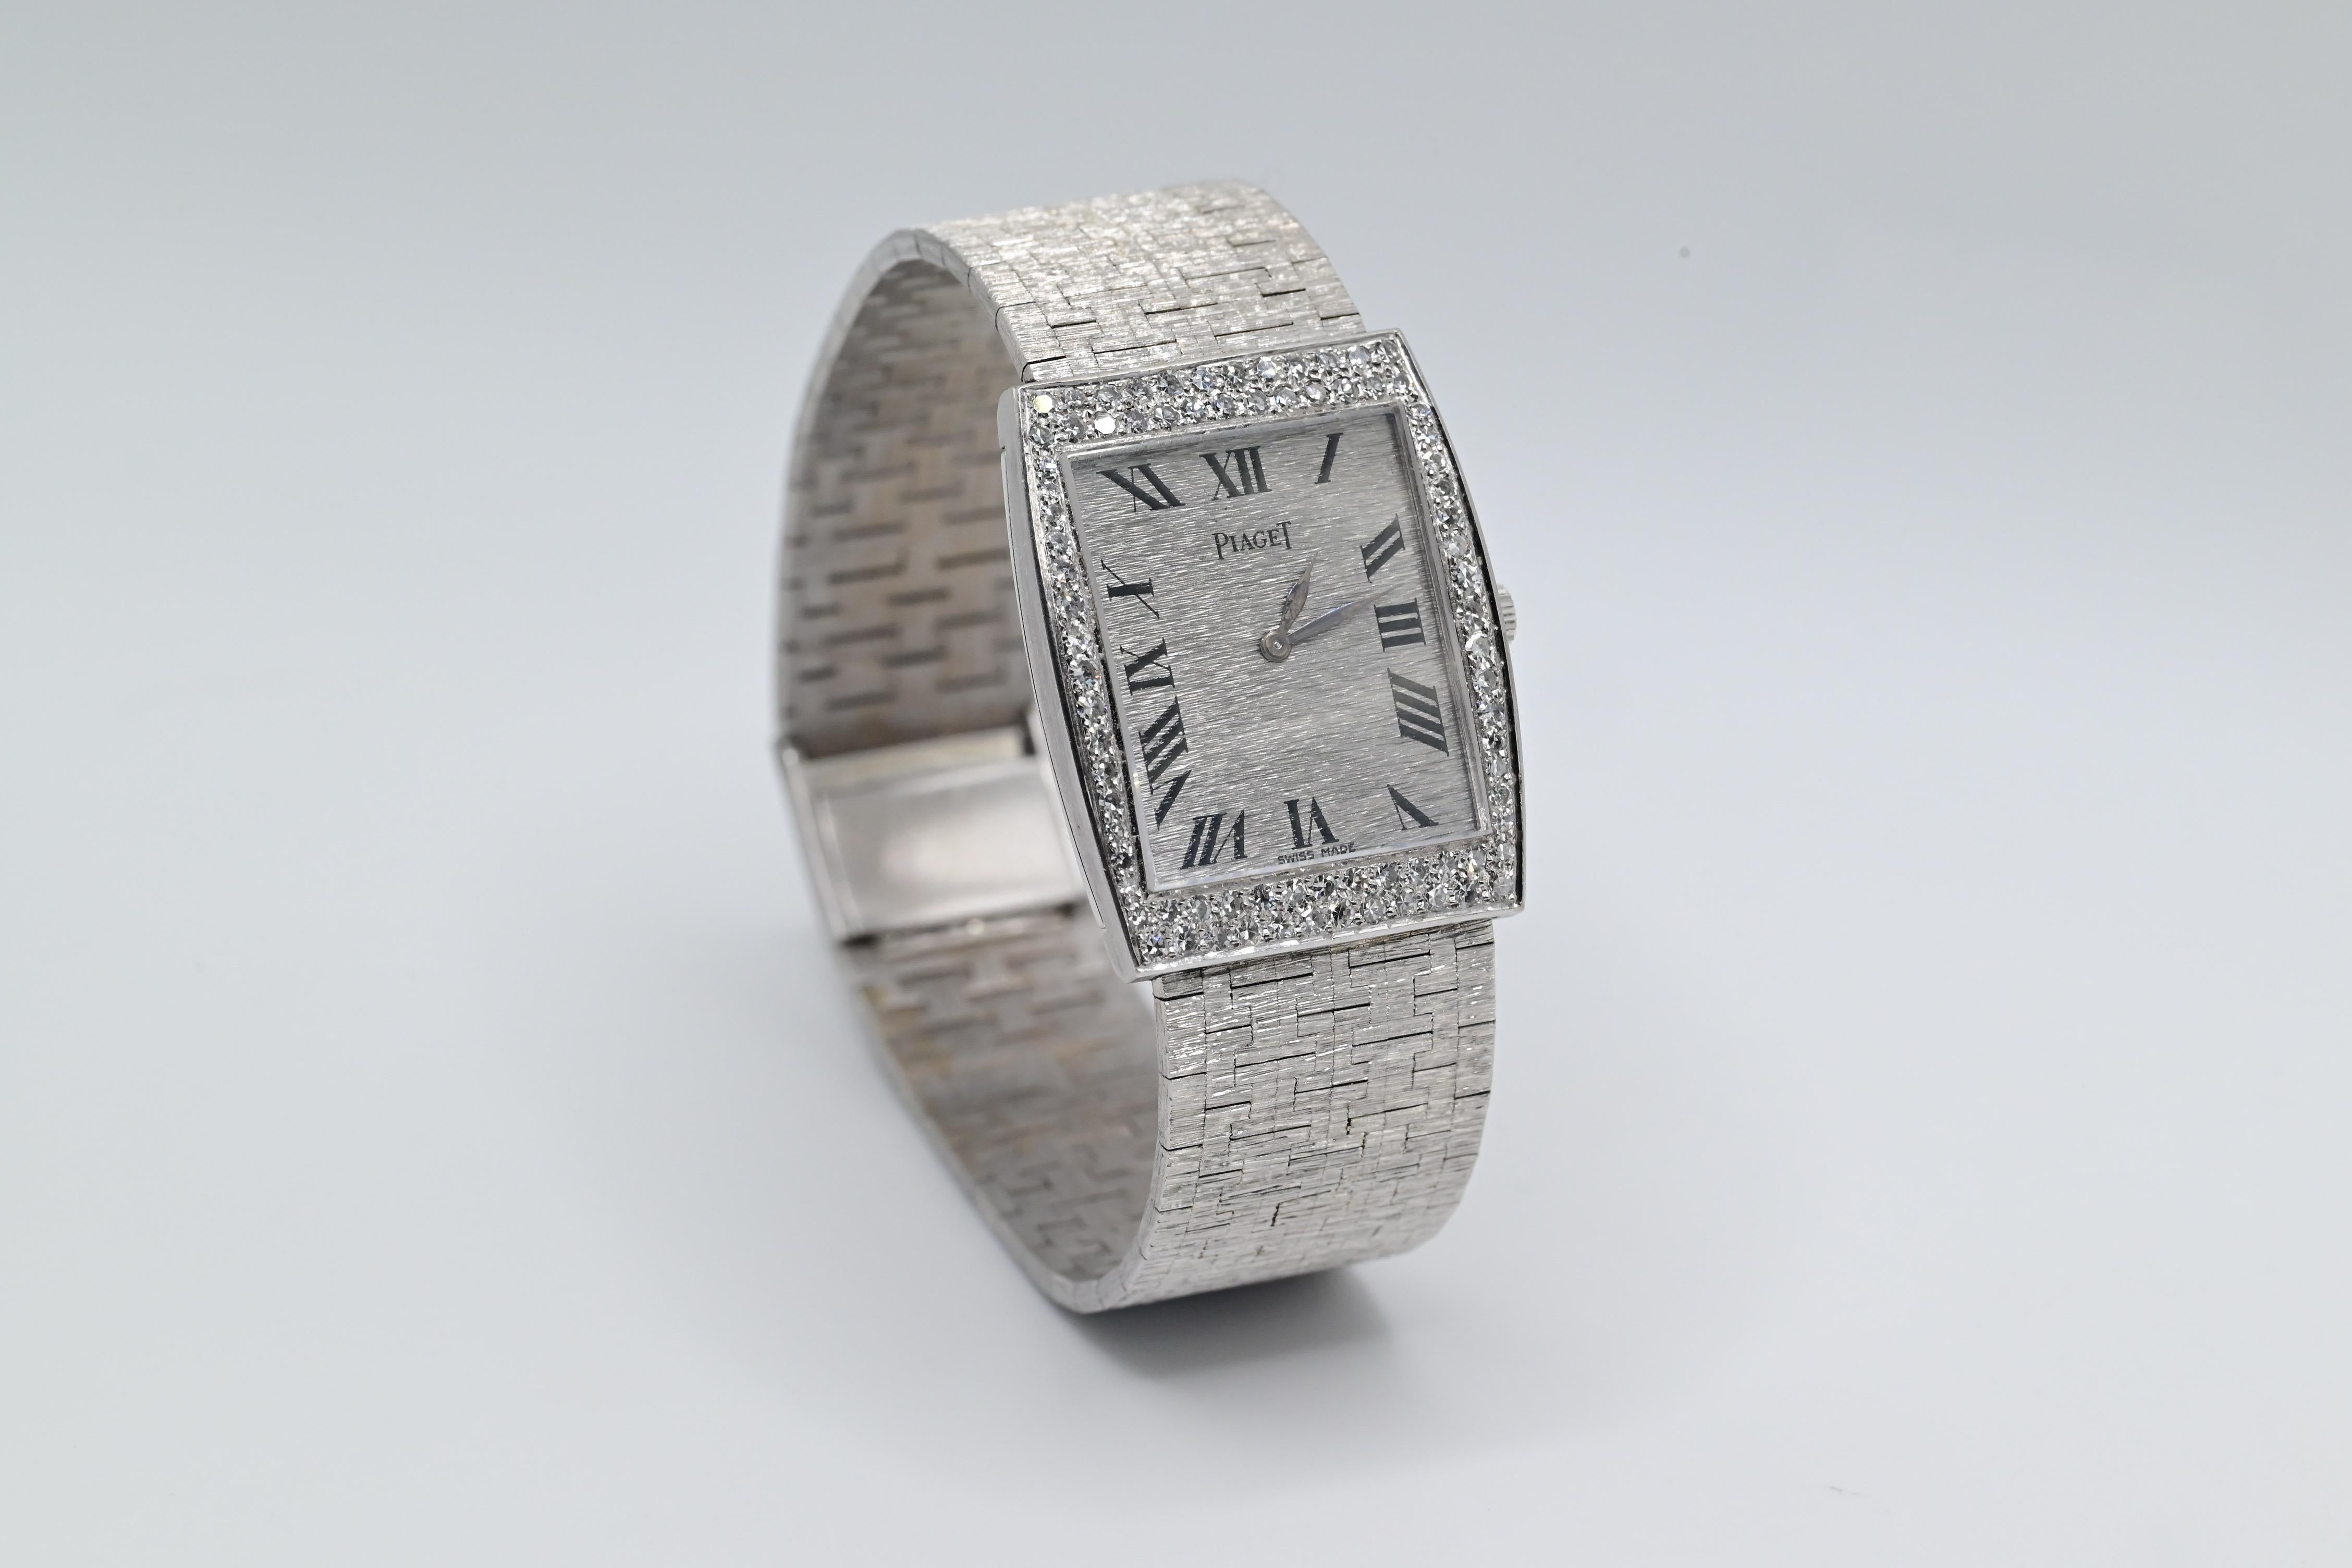 Description & Features: Piaget Gold & Diamond Wristwatch Ref 9675


18 Karat White Gold, Manual Mechanical, Rectangular Shaped Case Brushed


Gray Tone Dial With Black Roman Numeral Dial, 48 Round Shaped Natural Diamonds


Approx 1.5-2 Carat Total